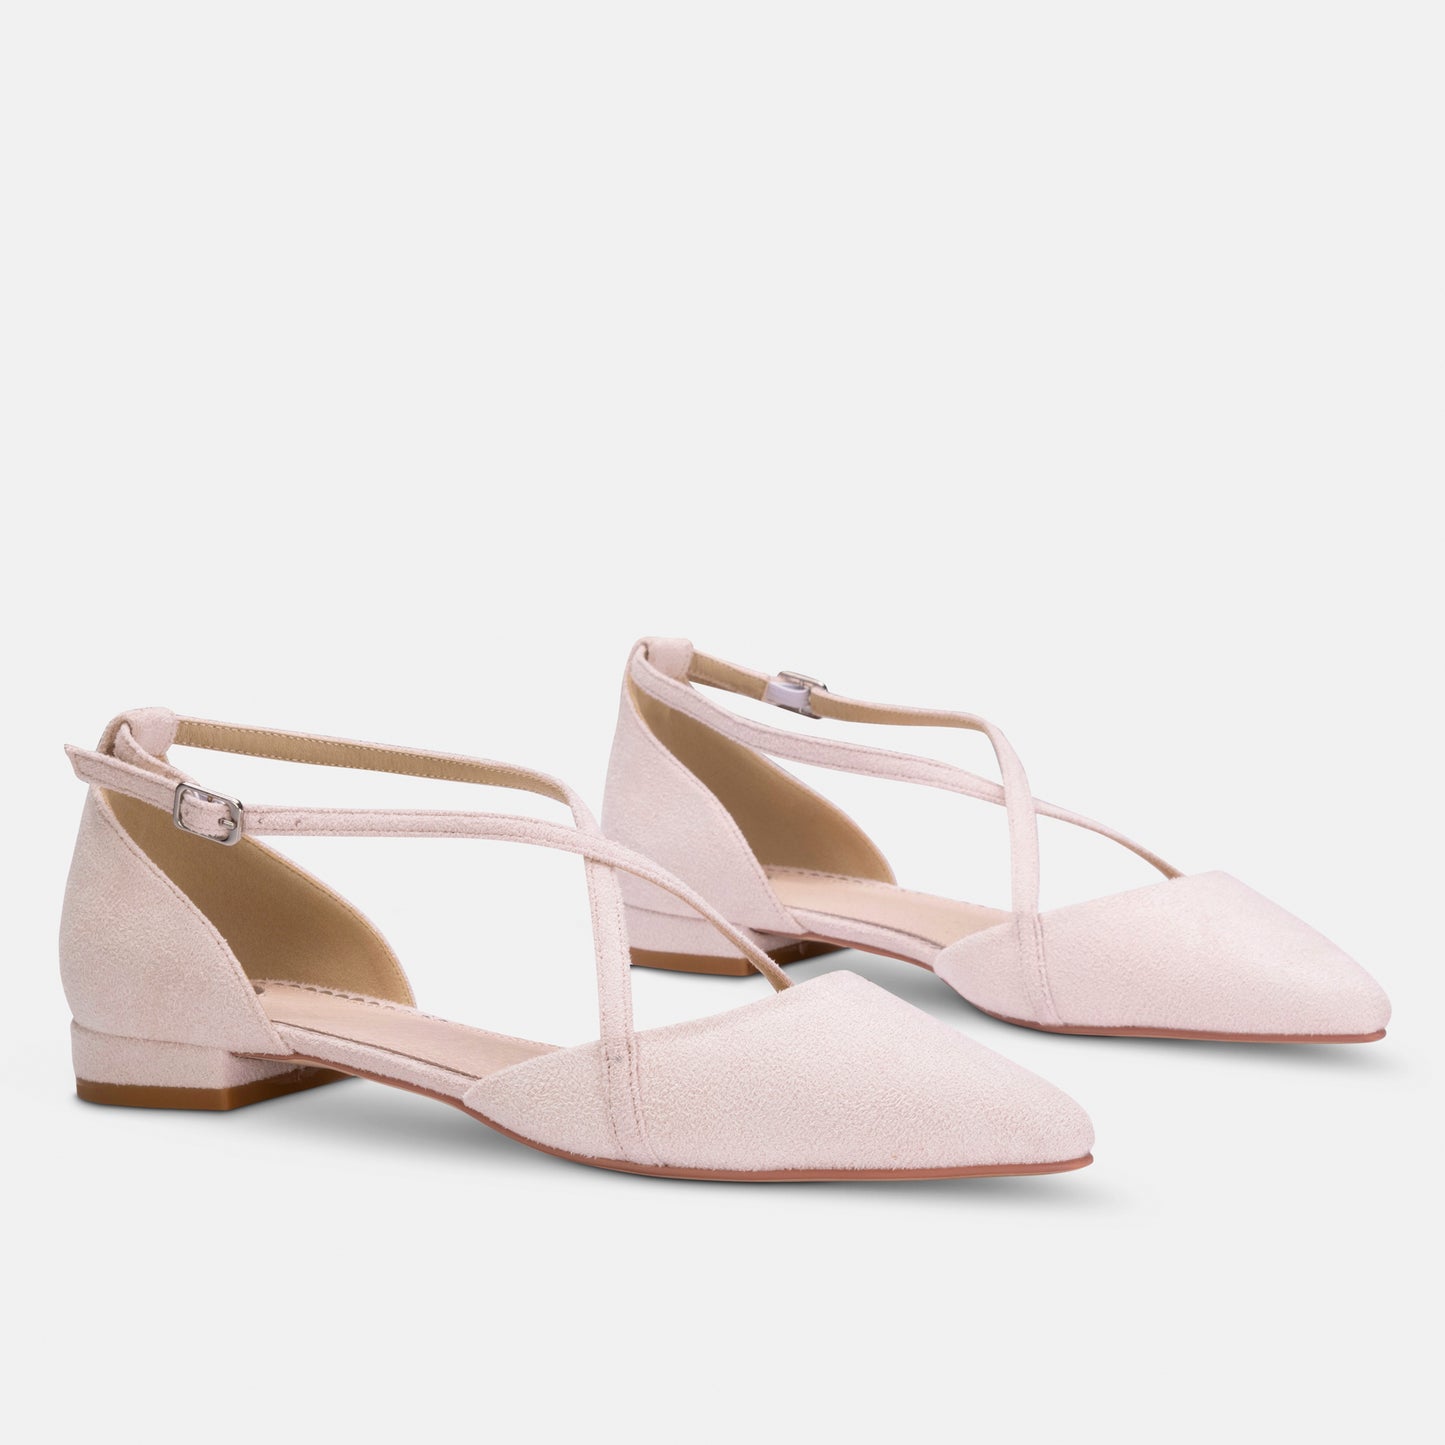 Davina blush suede effect flats SIZES 38/ 39/ 40/ 41 ONLY